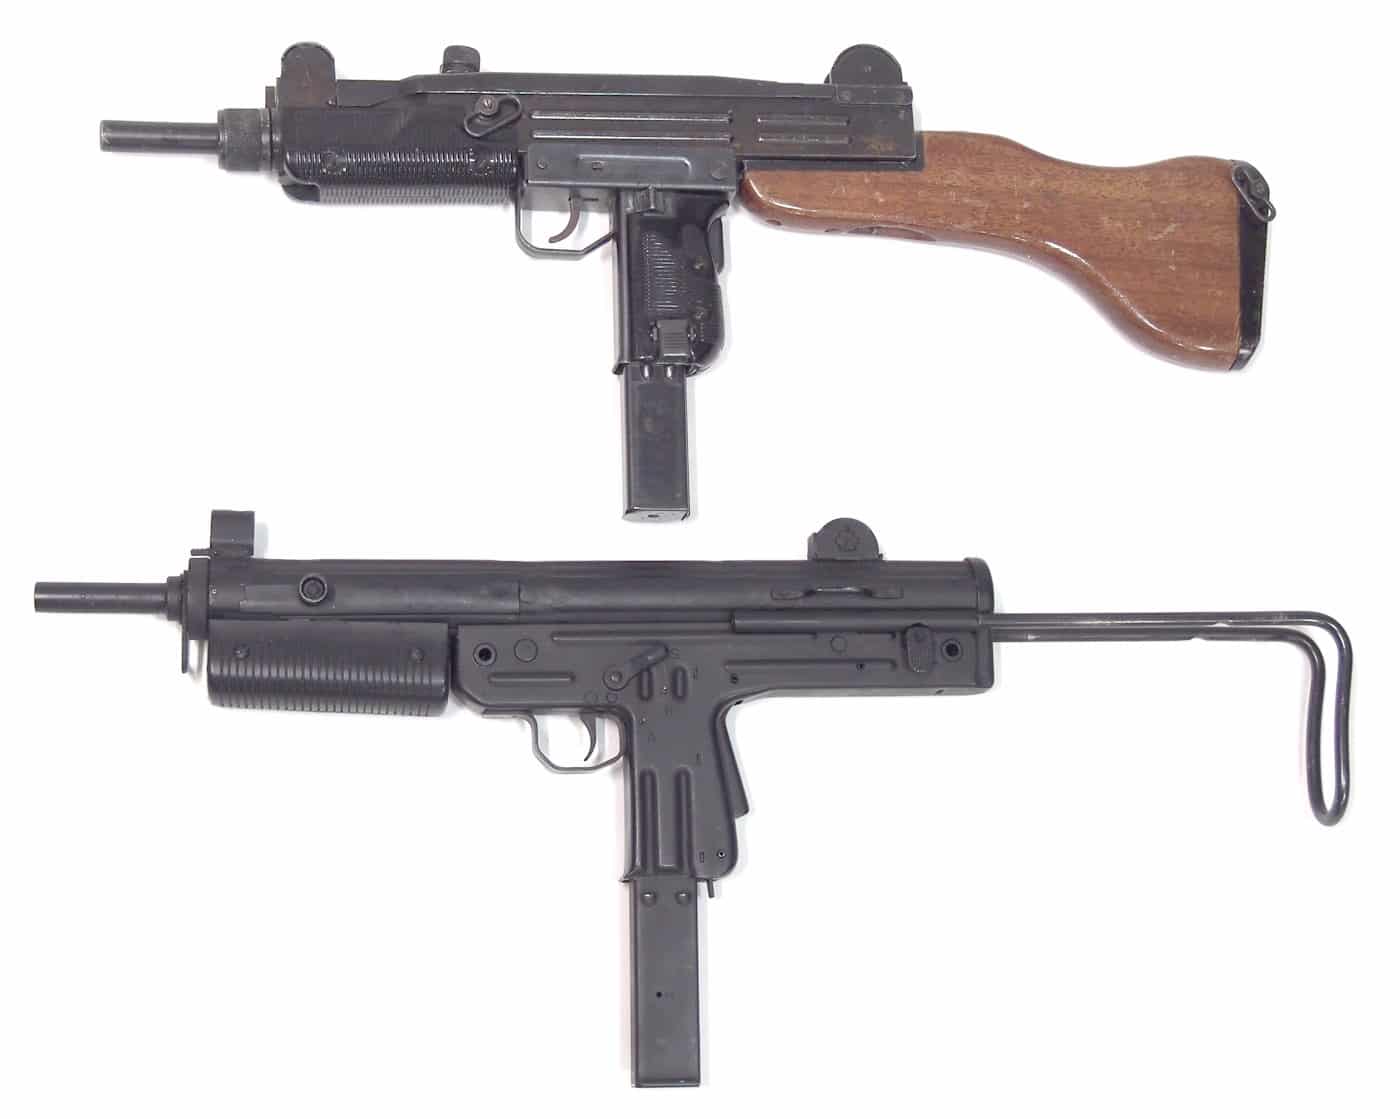 FMK-3 vs UZI: both are submachine guns with similar features, but they are significantly different.